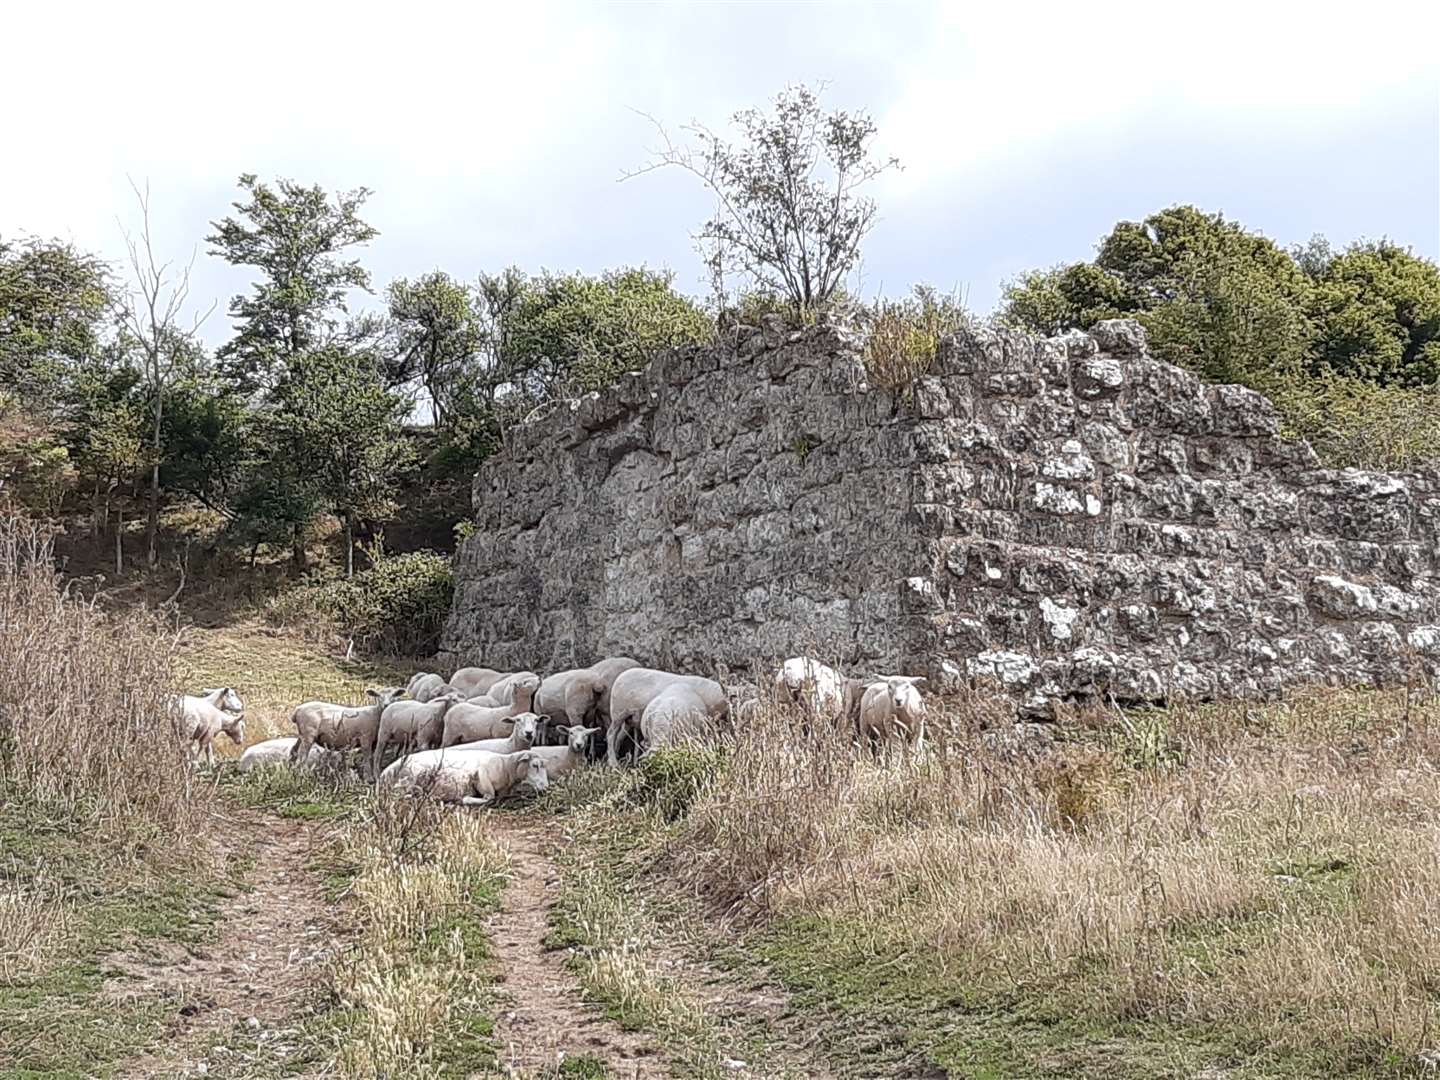 Sheep now surround the ancient chapel